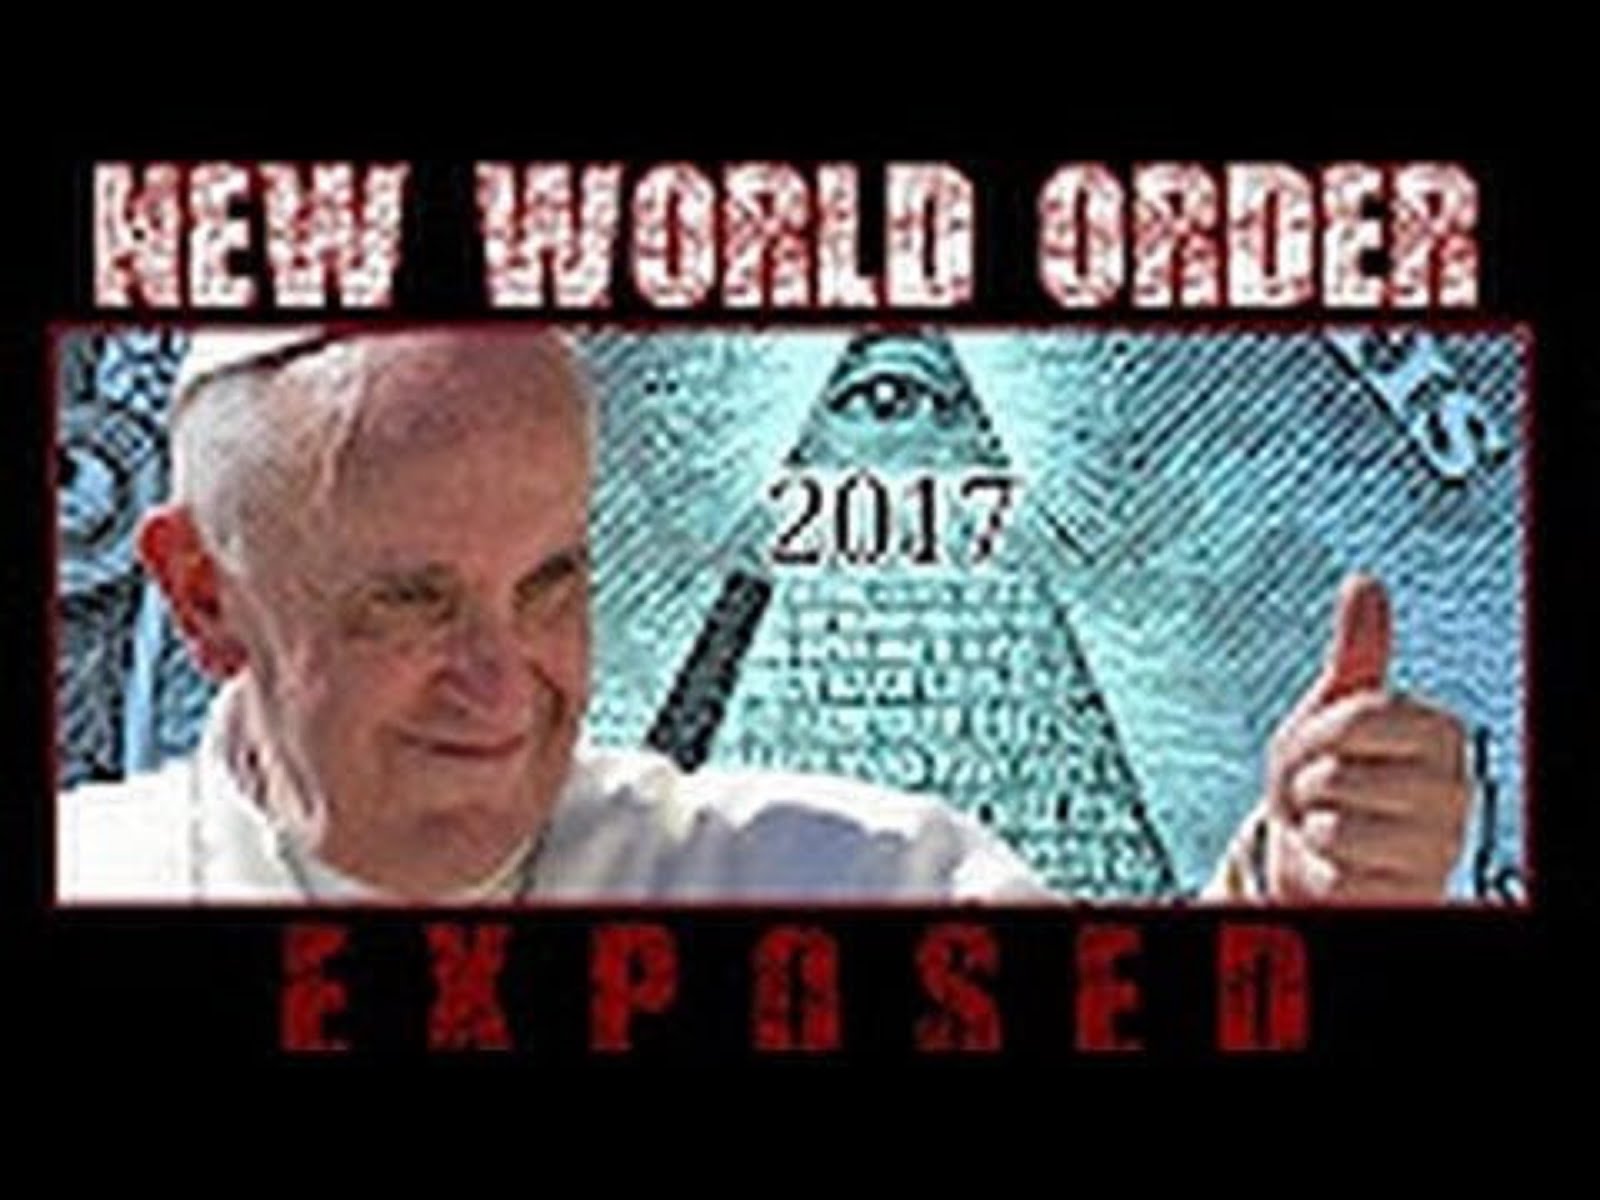 NEW WORLD ORDER - EXPOSED